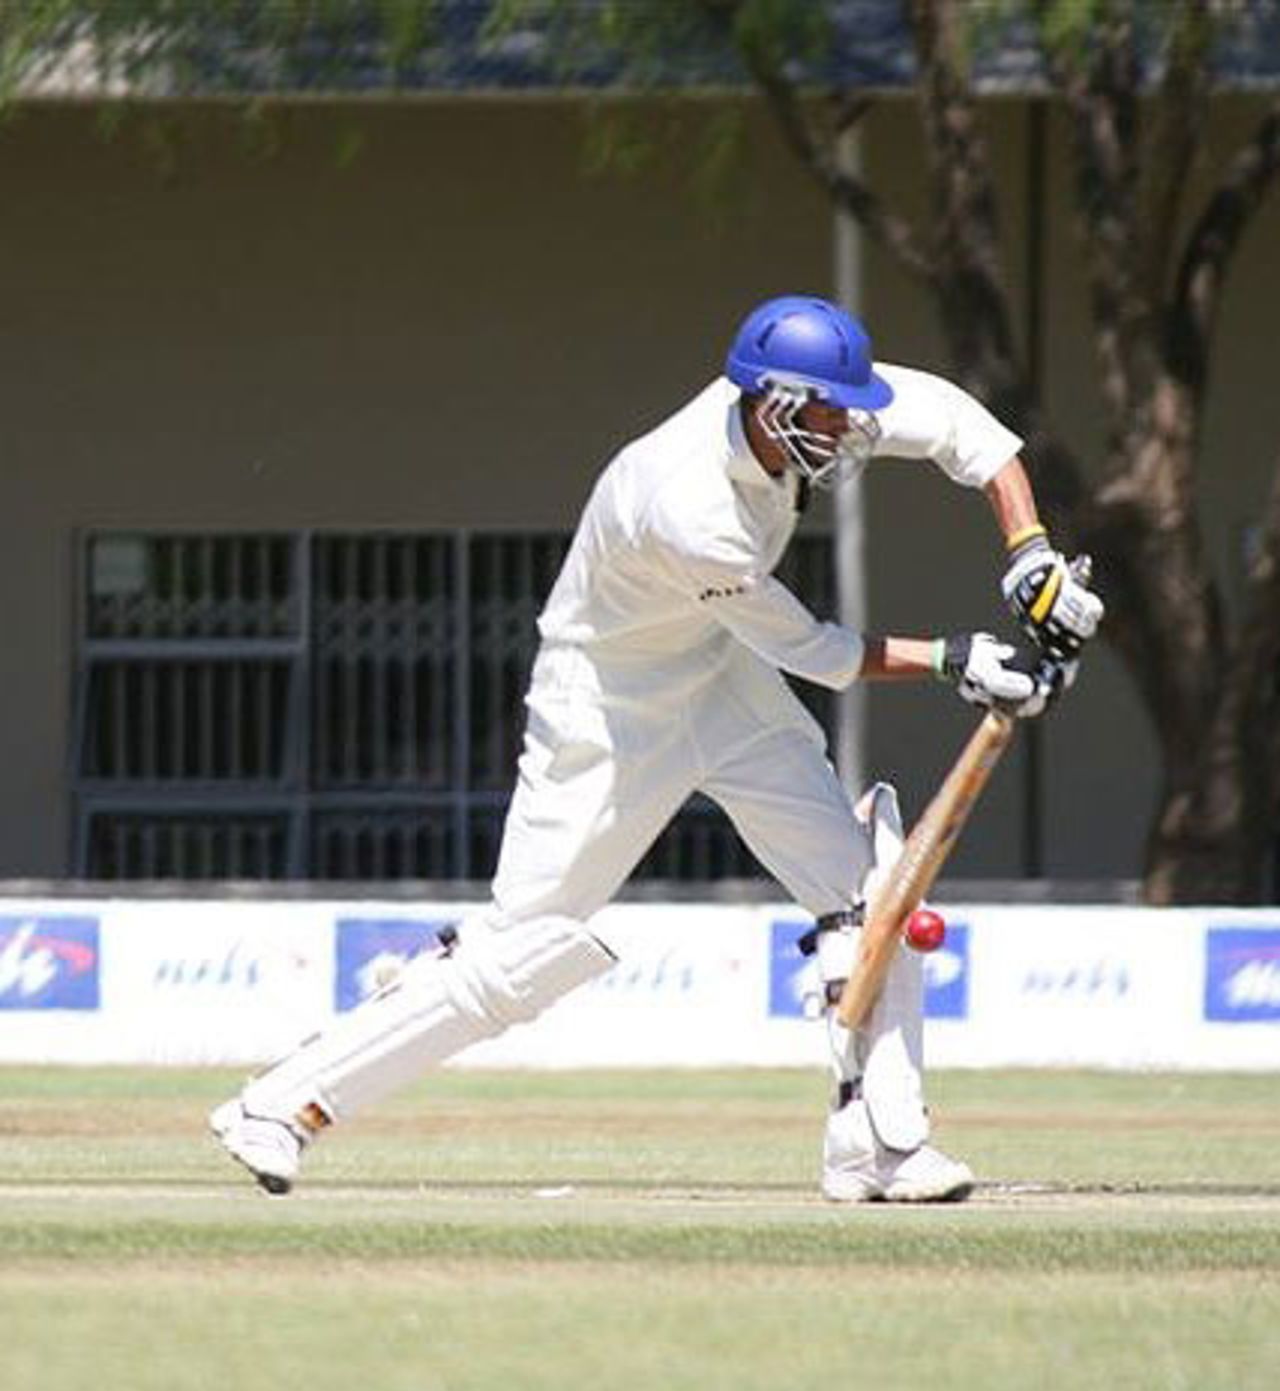 Bjorn Kotze defends during his innings of 163 not out, Namibia v Canada, Windhoek, October 26, 2007